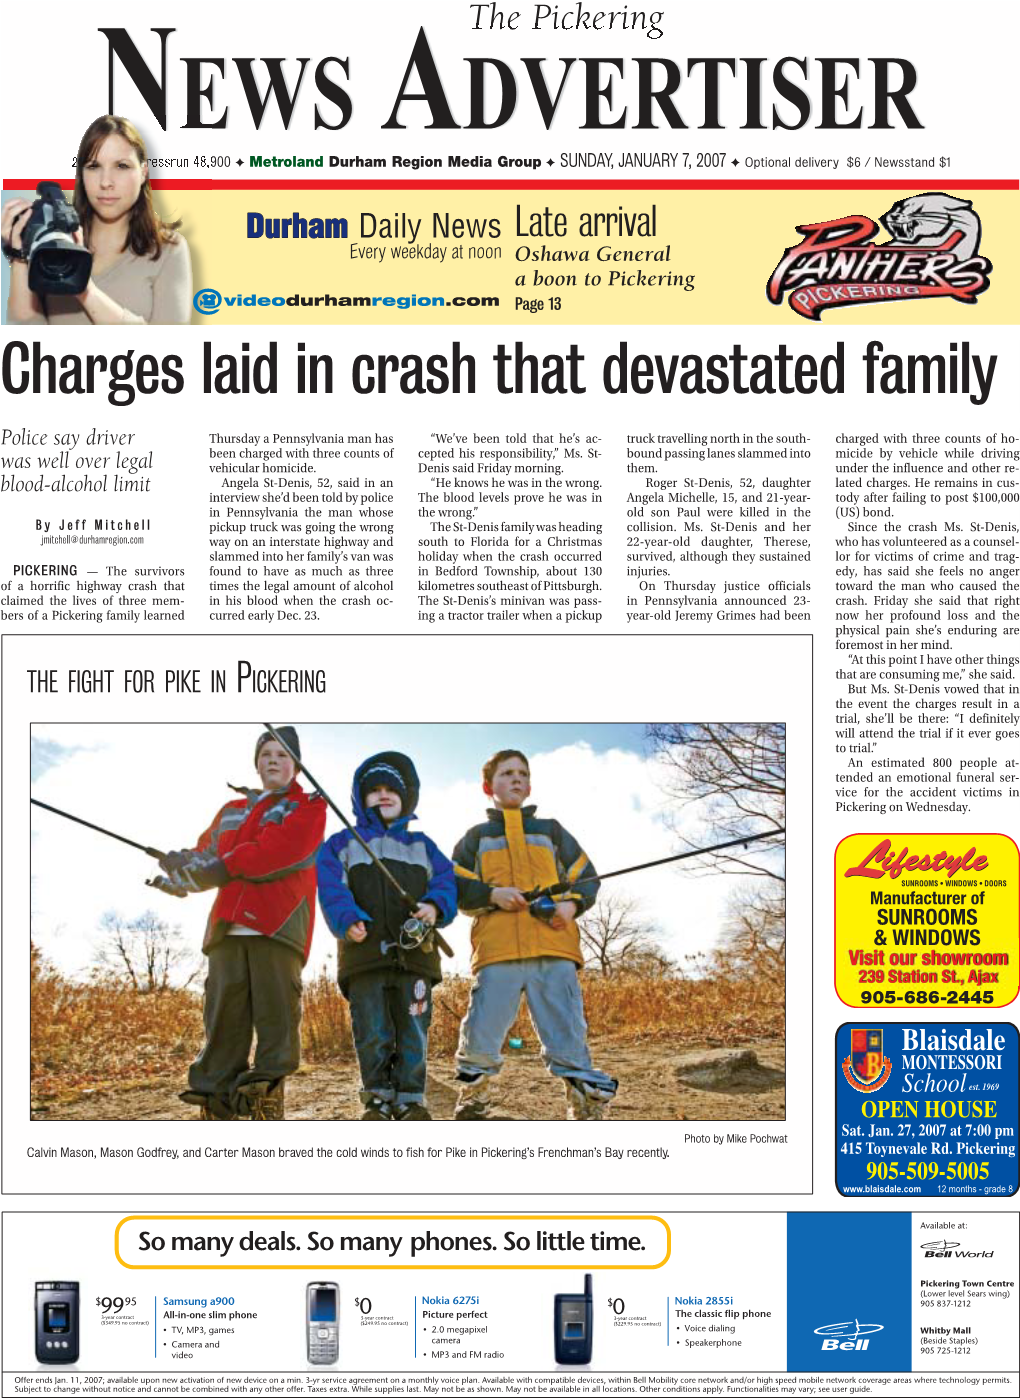 Charges Laid in Crash That Devastated Family